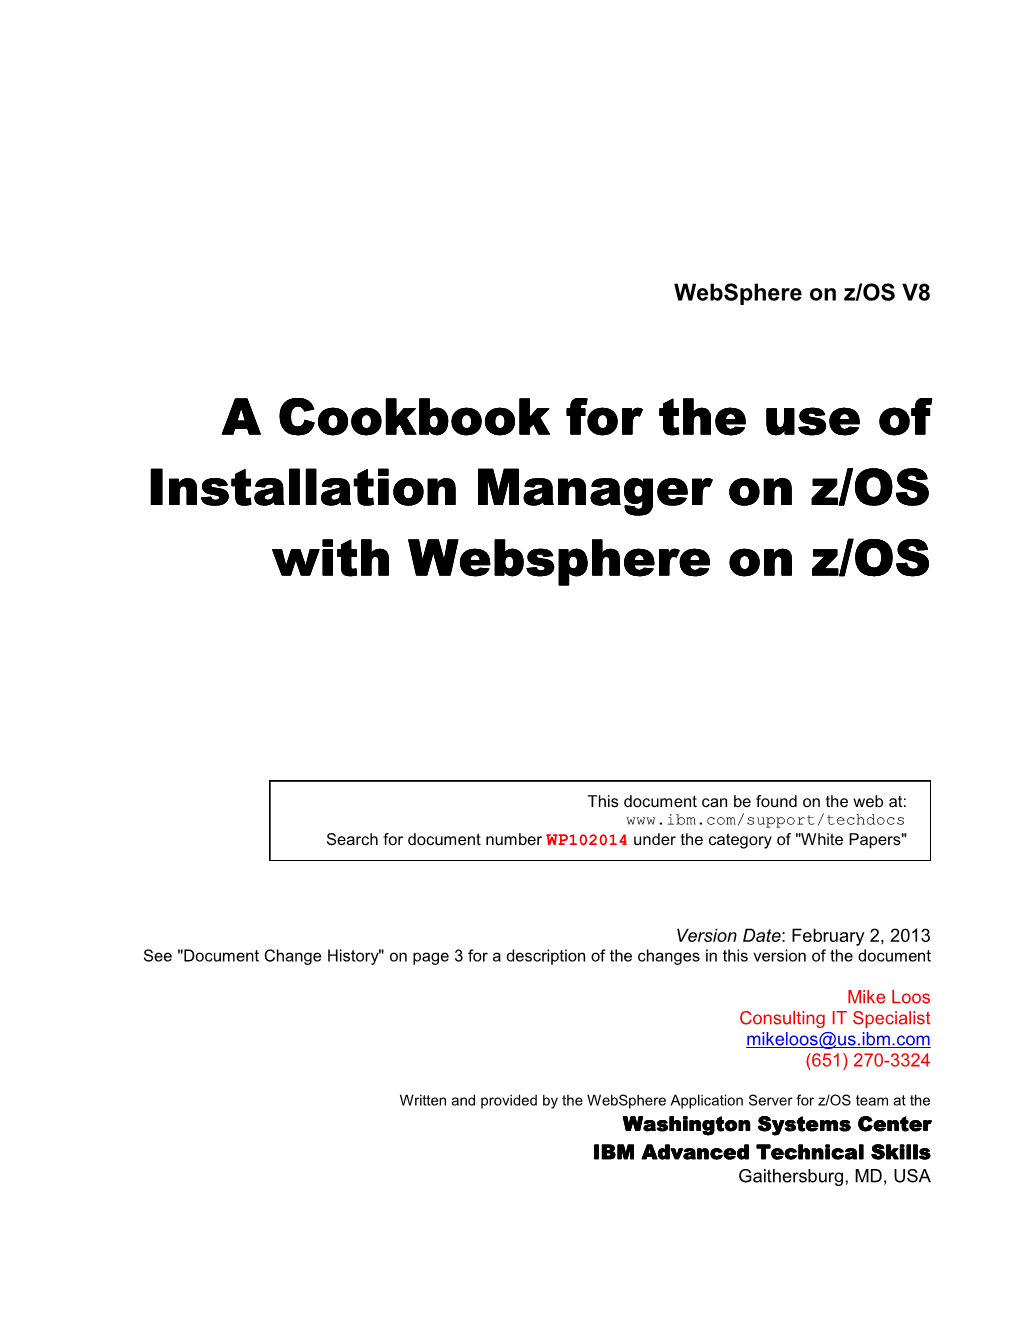 A Cookbook for the Use of Installation Manager on Zos with Websphere On